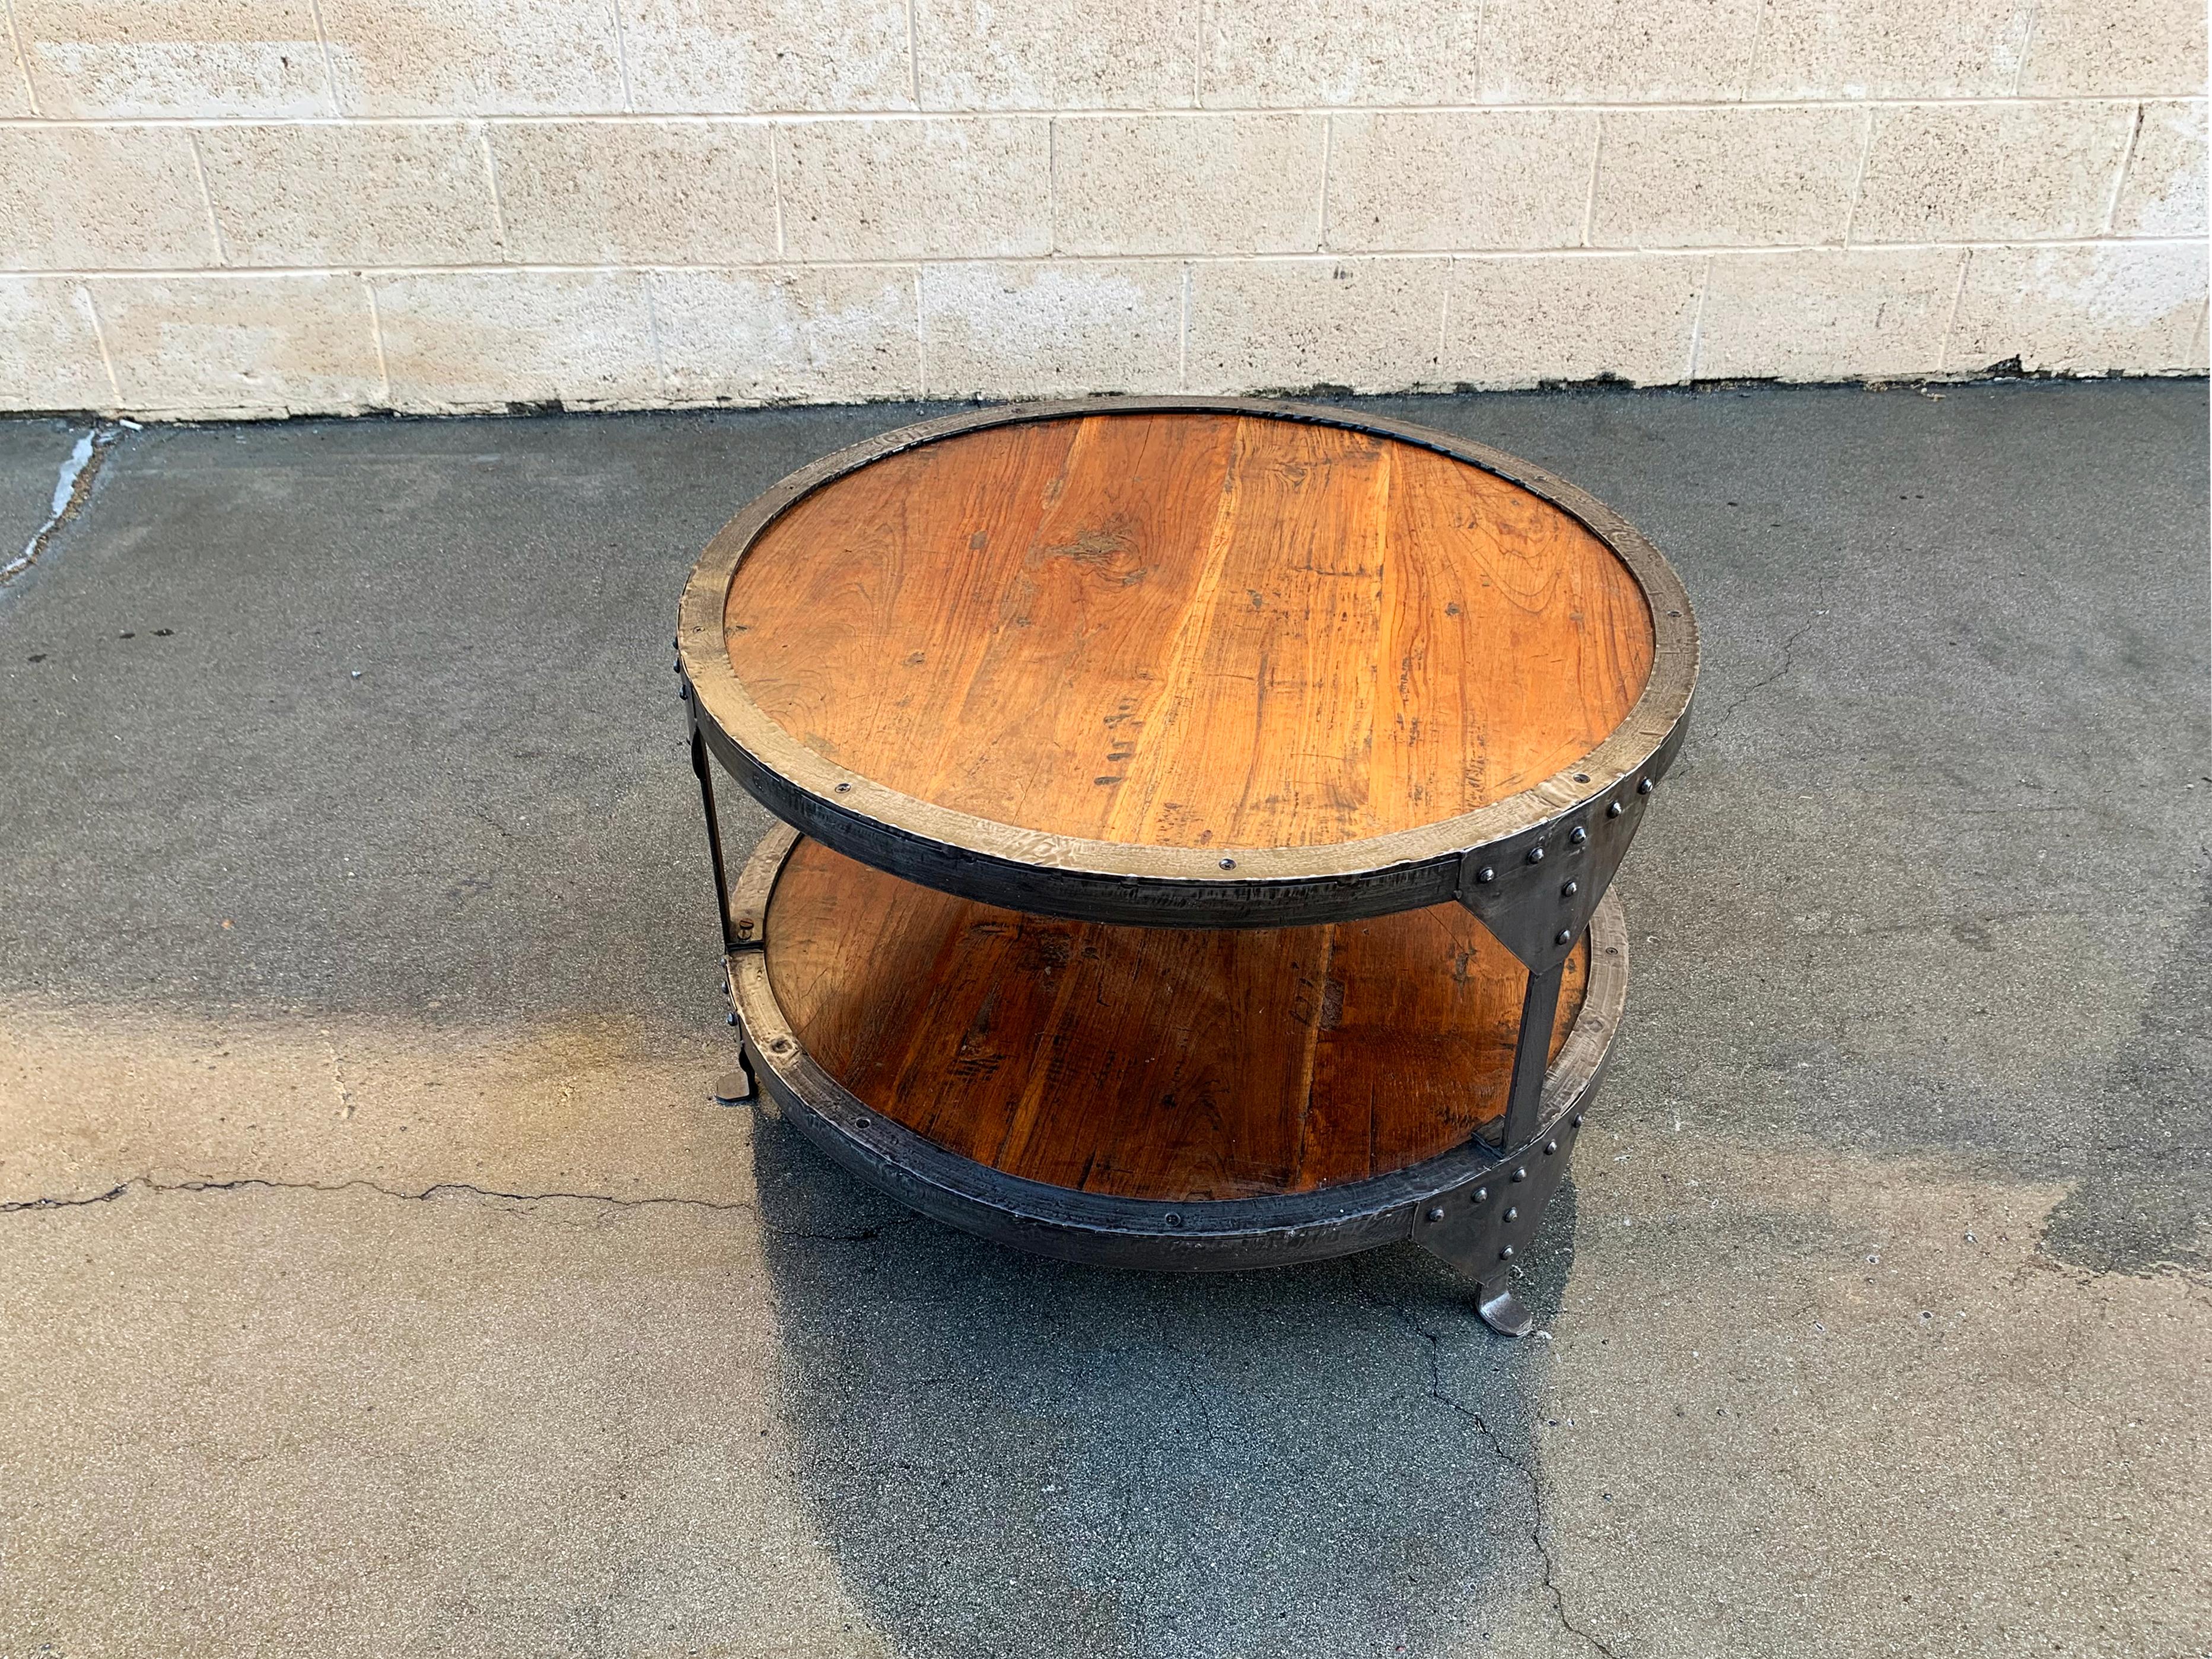 Vintage steel and wood round side table, with lower shelf, circa 2000. The combination patina steel and rustic wood comes together for a machine age/ Steampunk inspired design. One available. 

Dimensions: 30